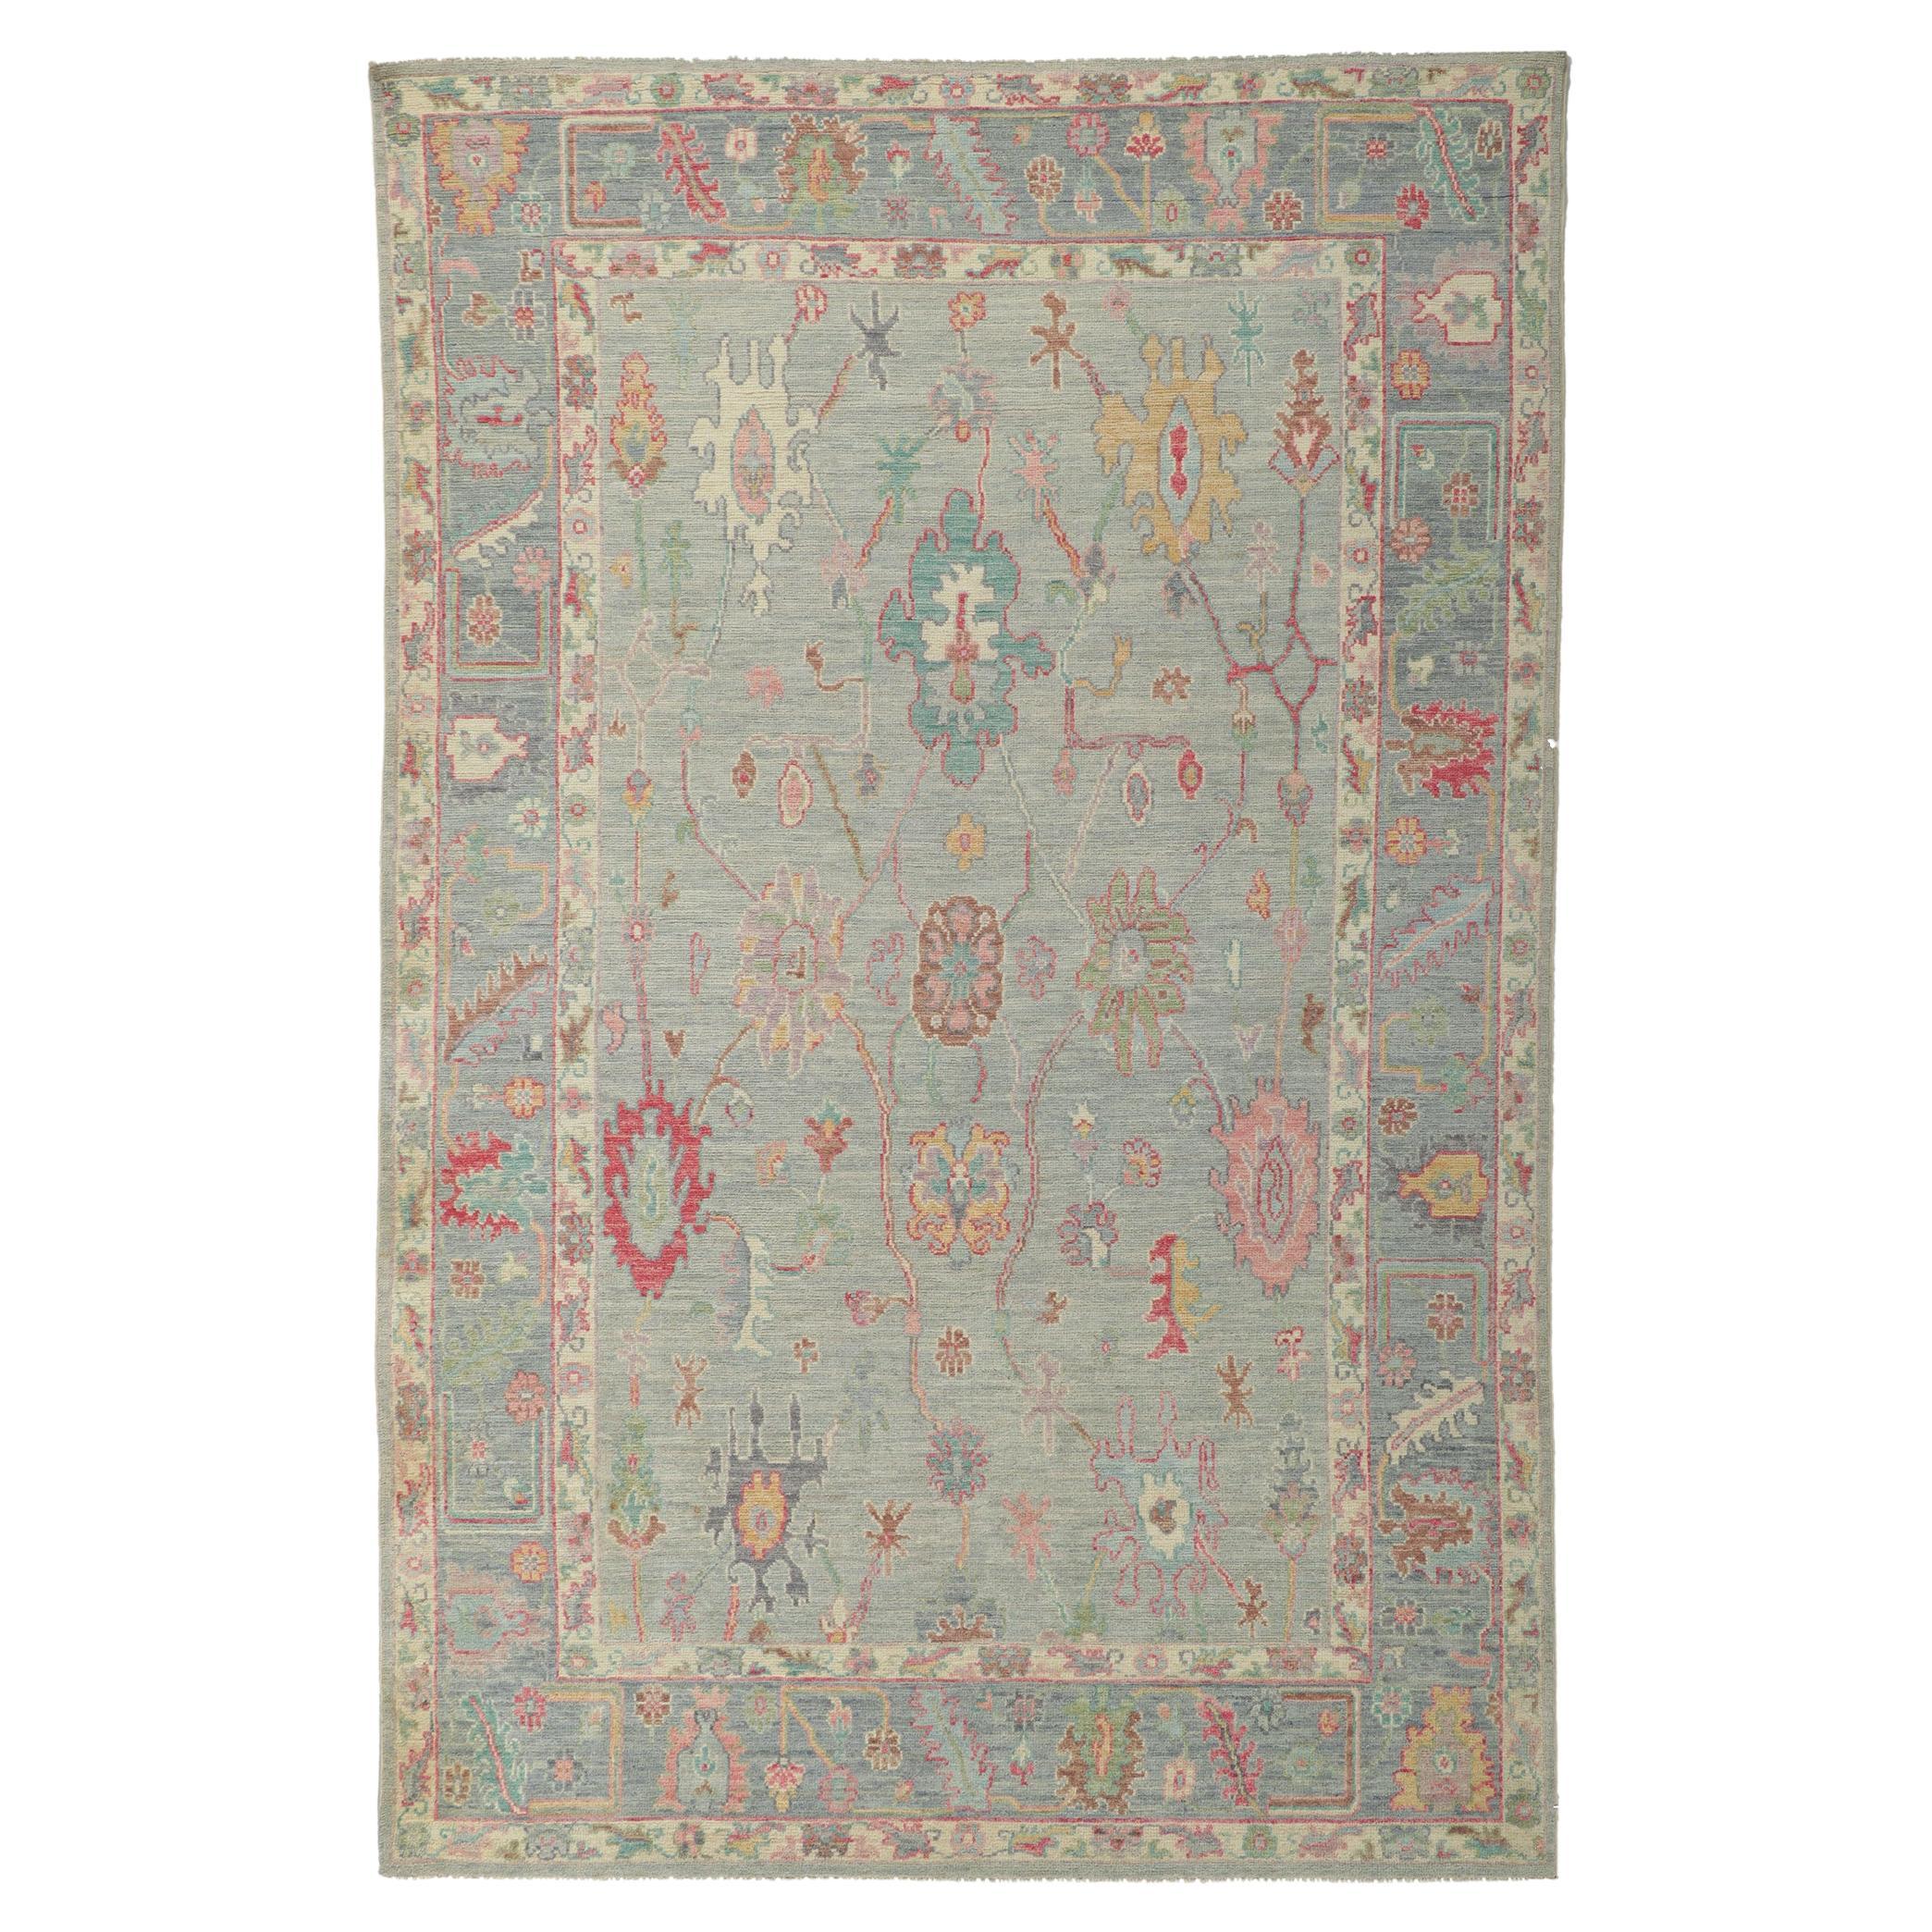 Light Blue Oushak Rug with Soft Colors, Swedish Gustavian Meets Modern Style